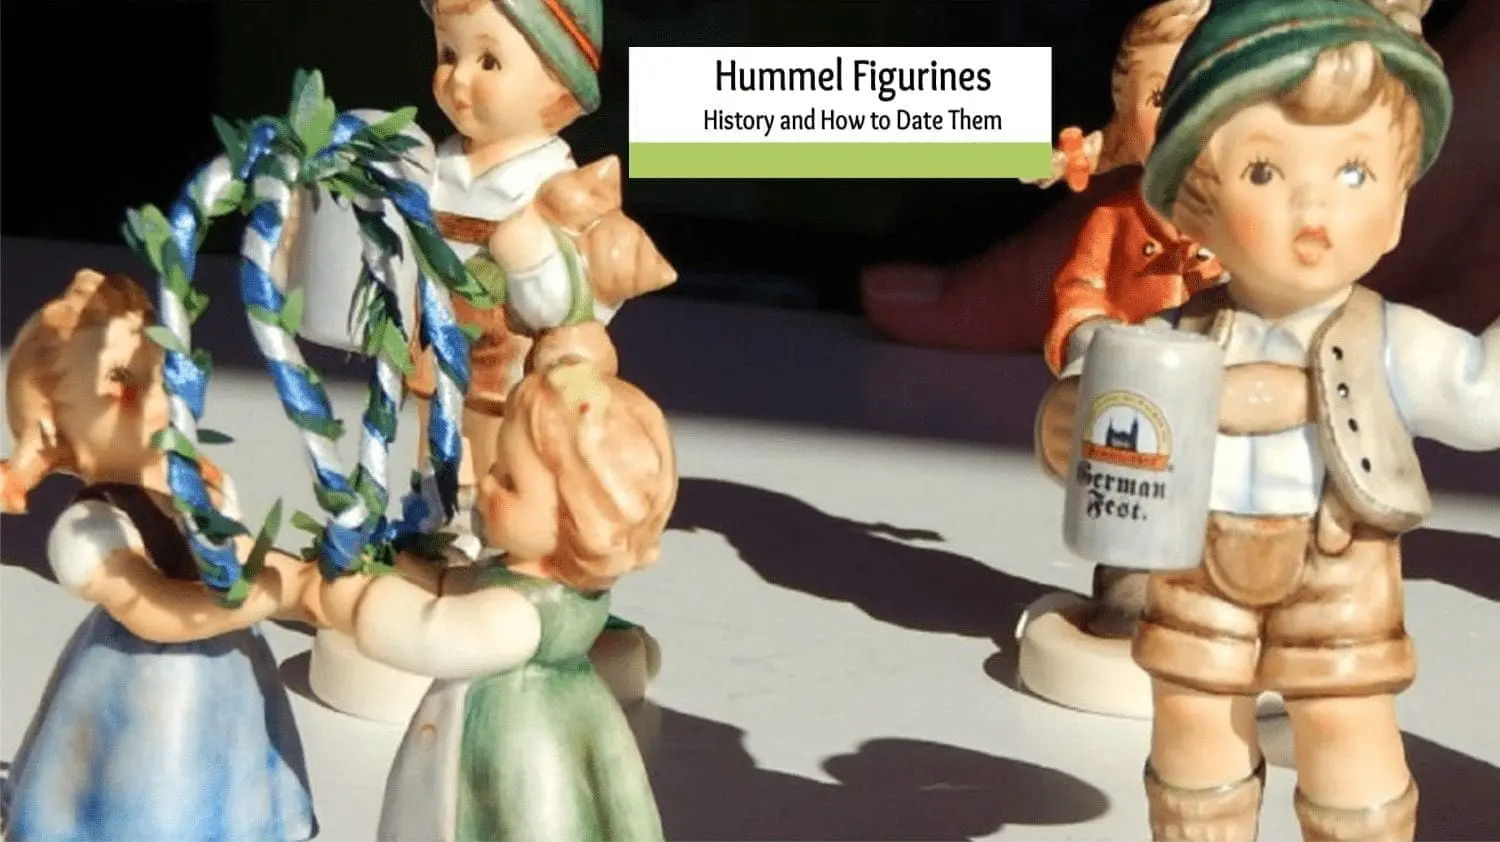 Figurines & Plates Official M.I Paperback by Von Reckl... Hummel Price Guide 